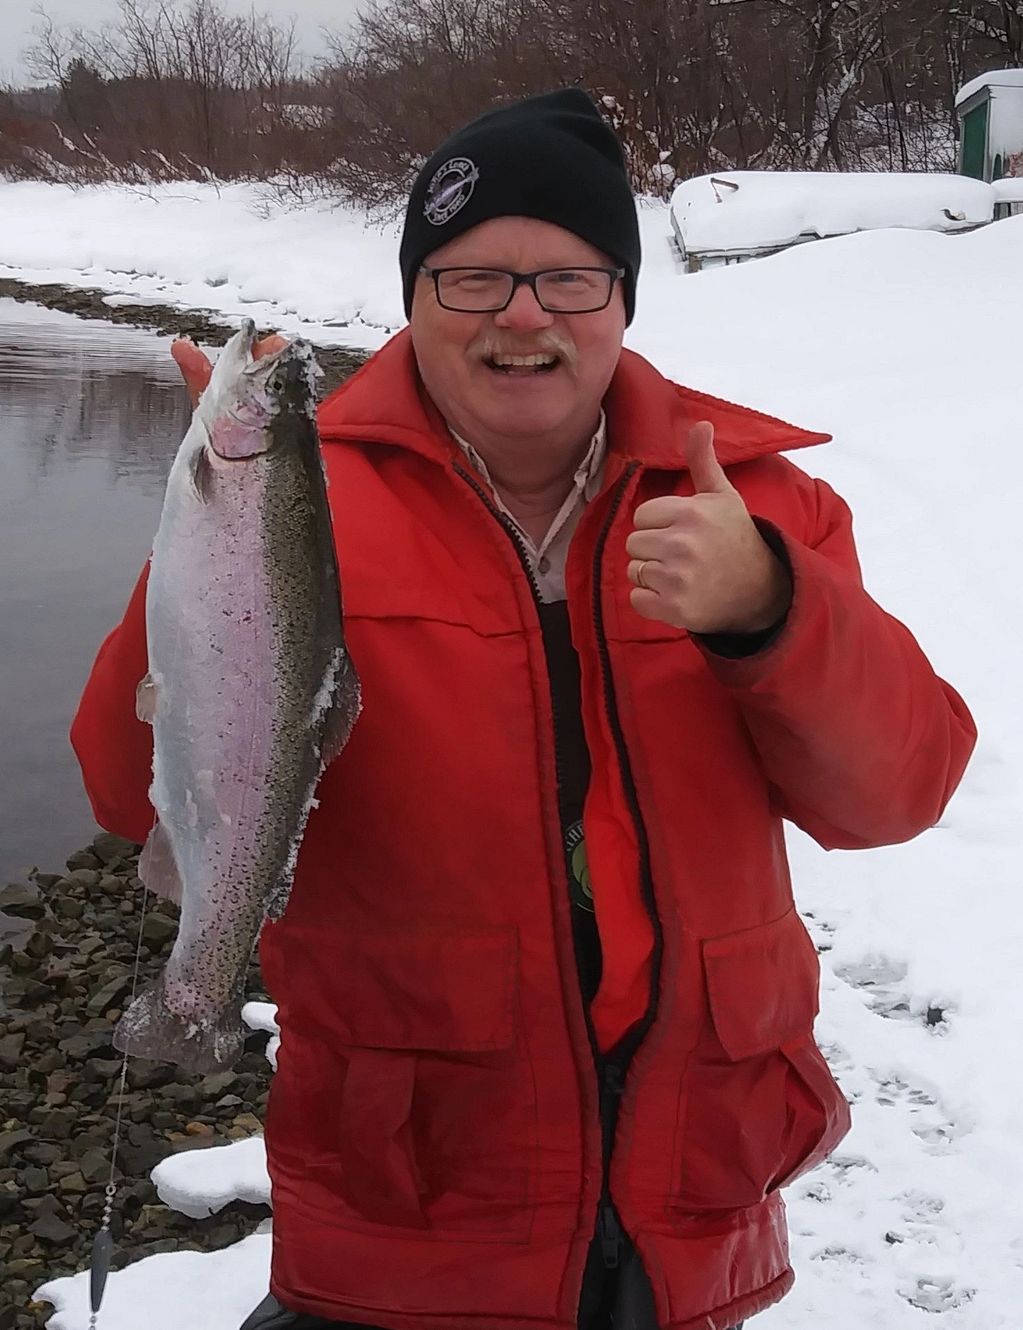 Rainbow Trout caught on he shore of Bras D'Or Lake.